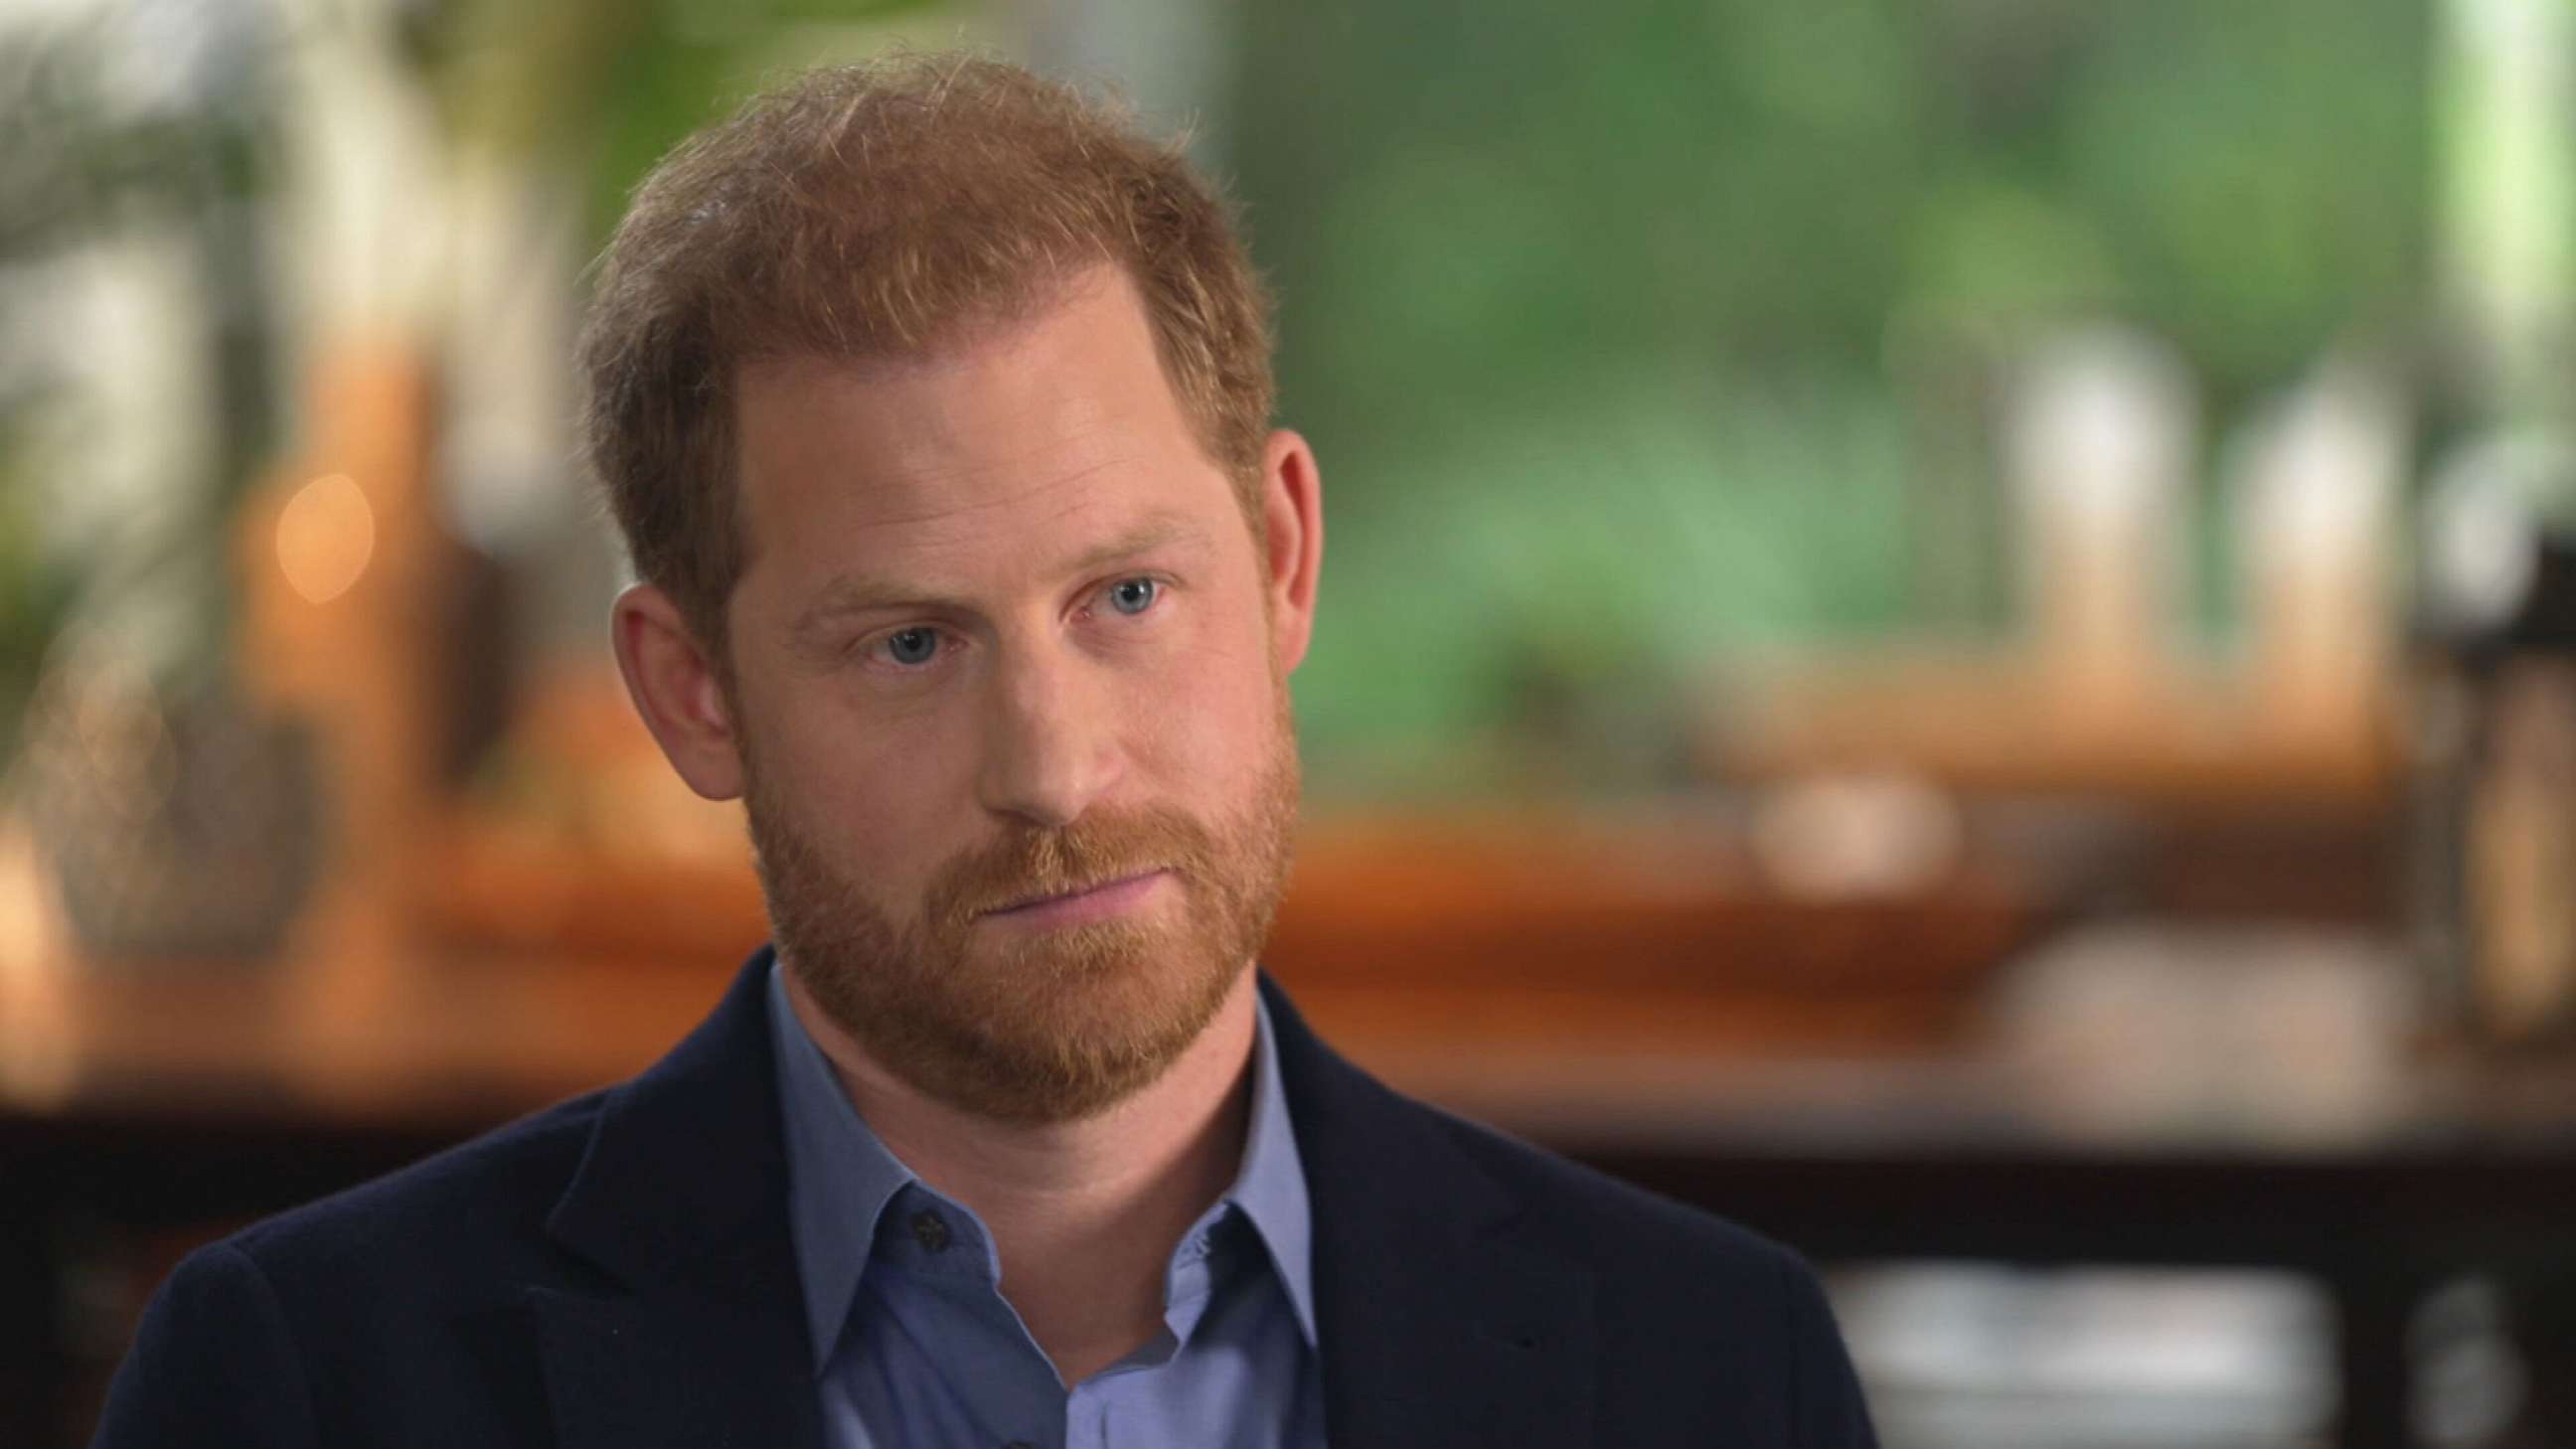 Prince Harry in His Own Words: Michael Strahan Reporting